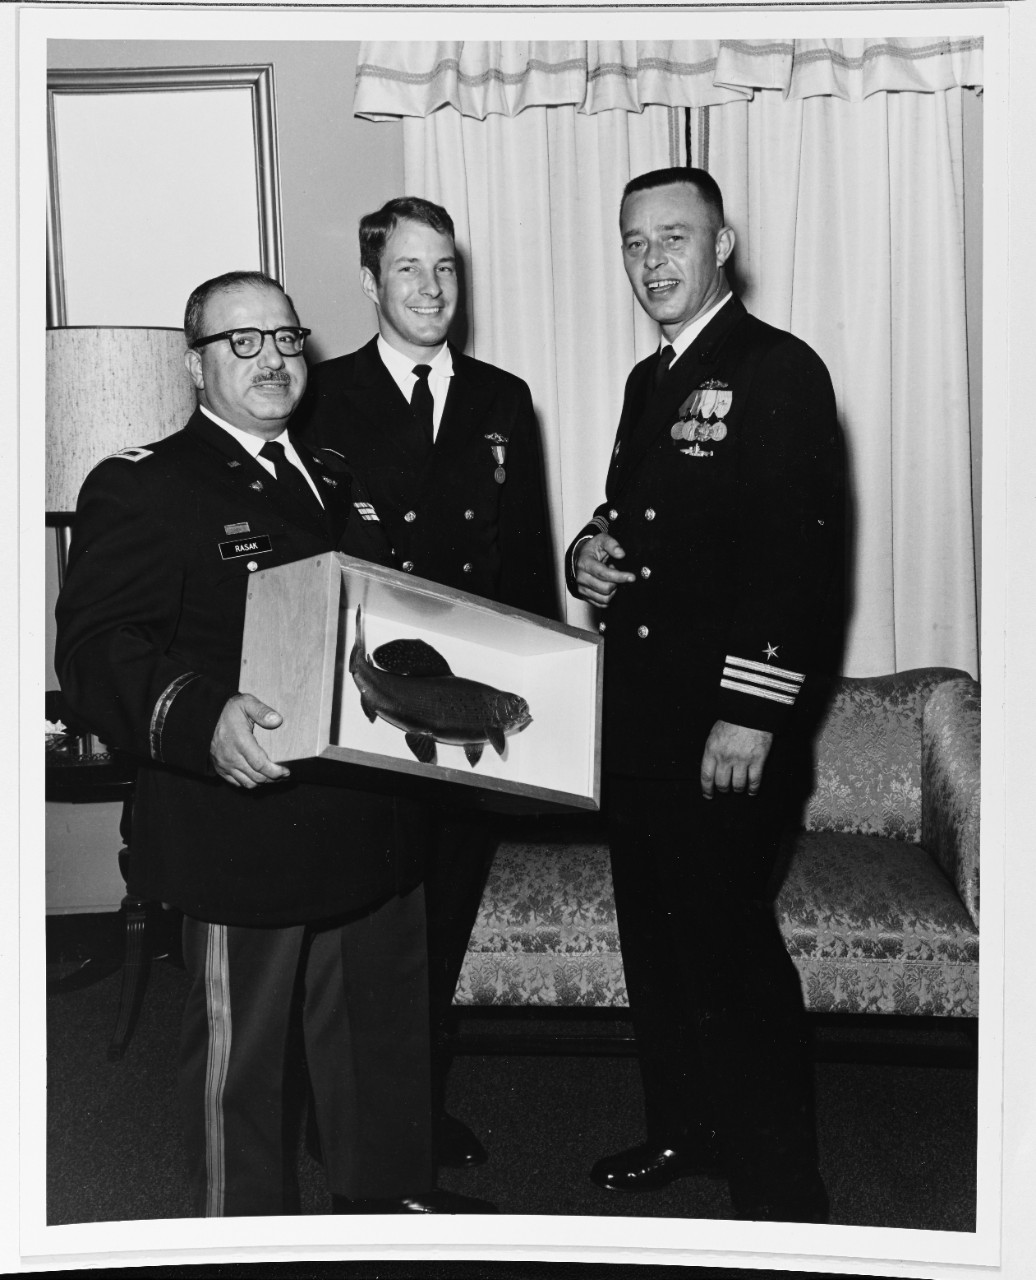 Gift presentation during commissioning reception of USS GRAYLING (SSN-646)